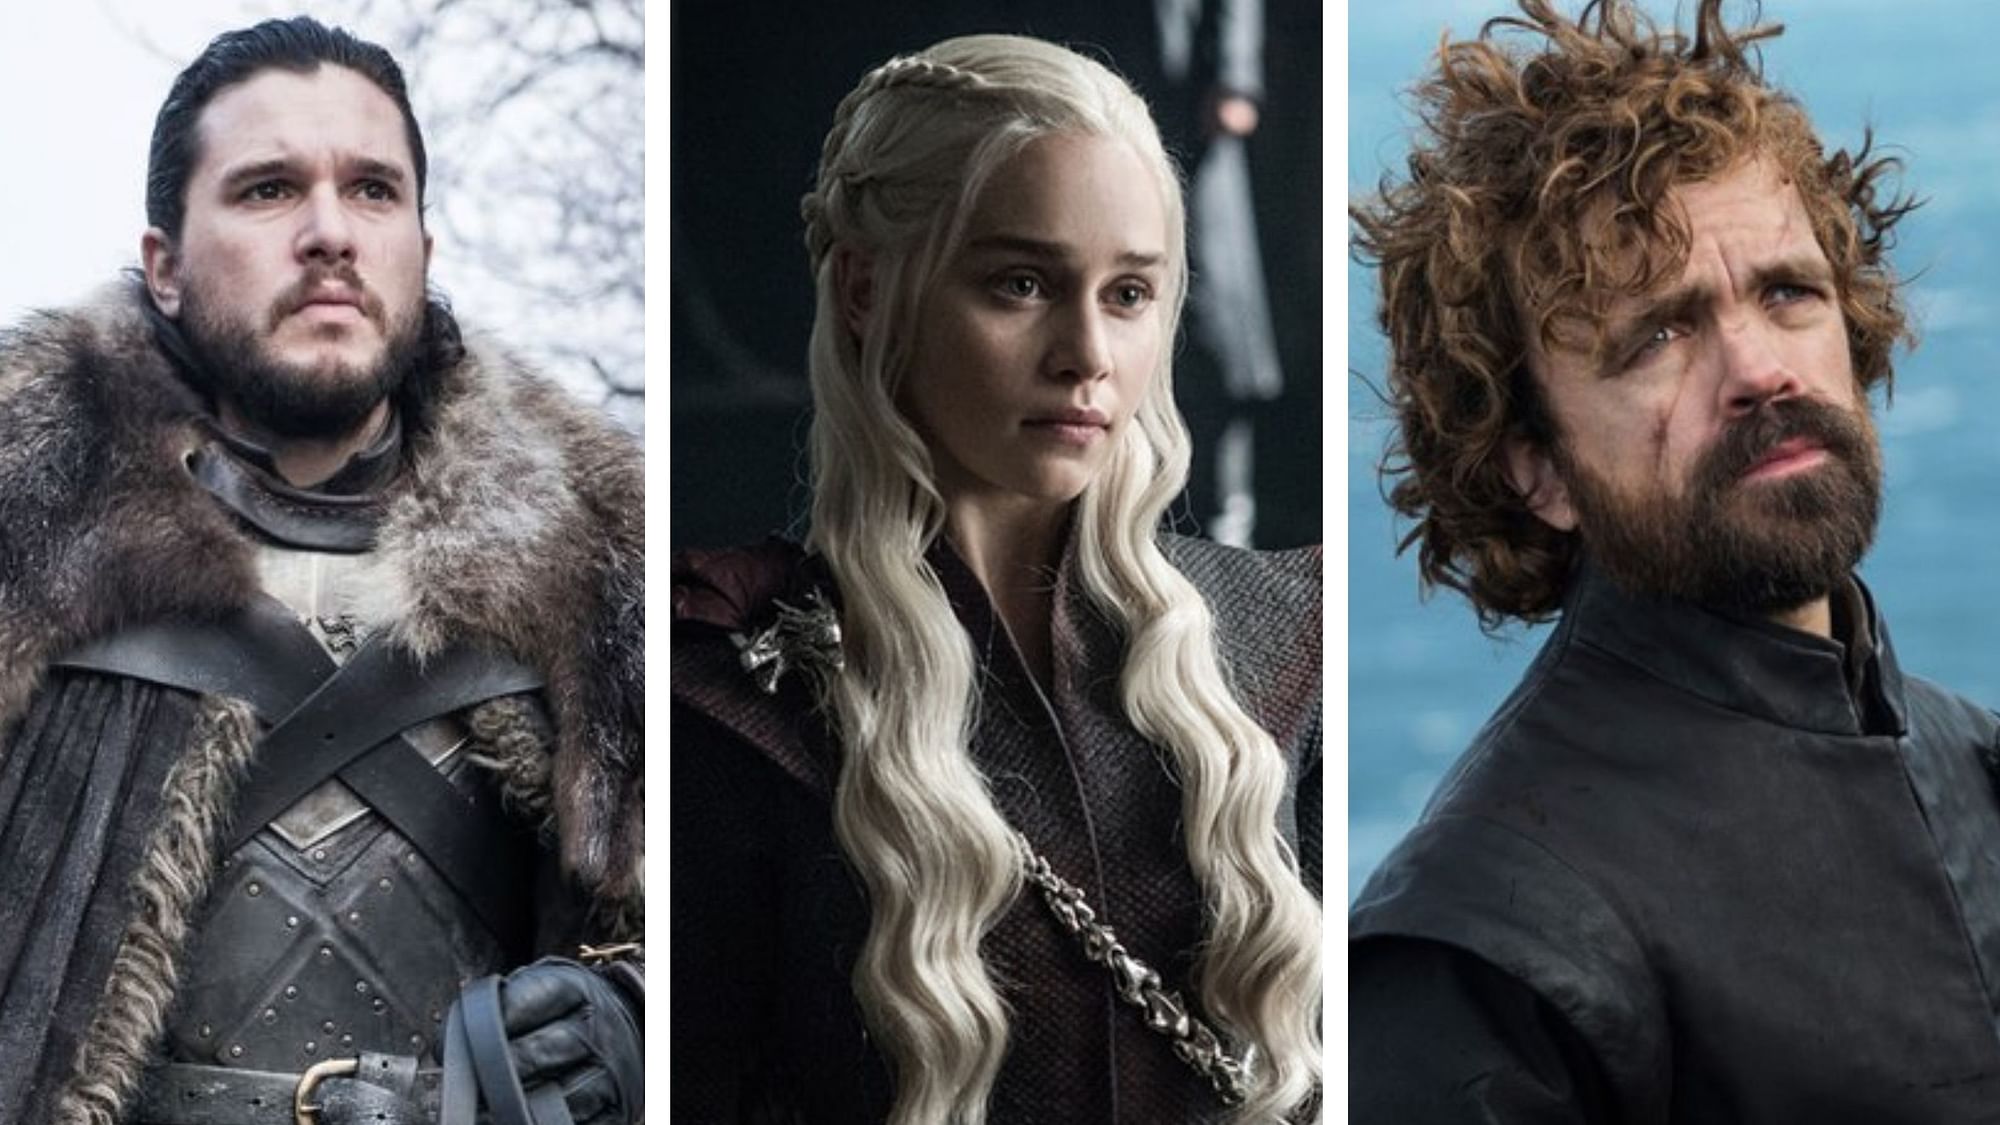 Algorithm predicts who has the highest chance of surviving the <i>Game of Thrones </i>season 8.